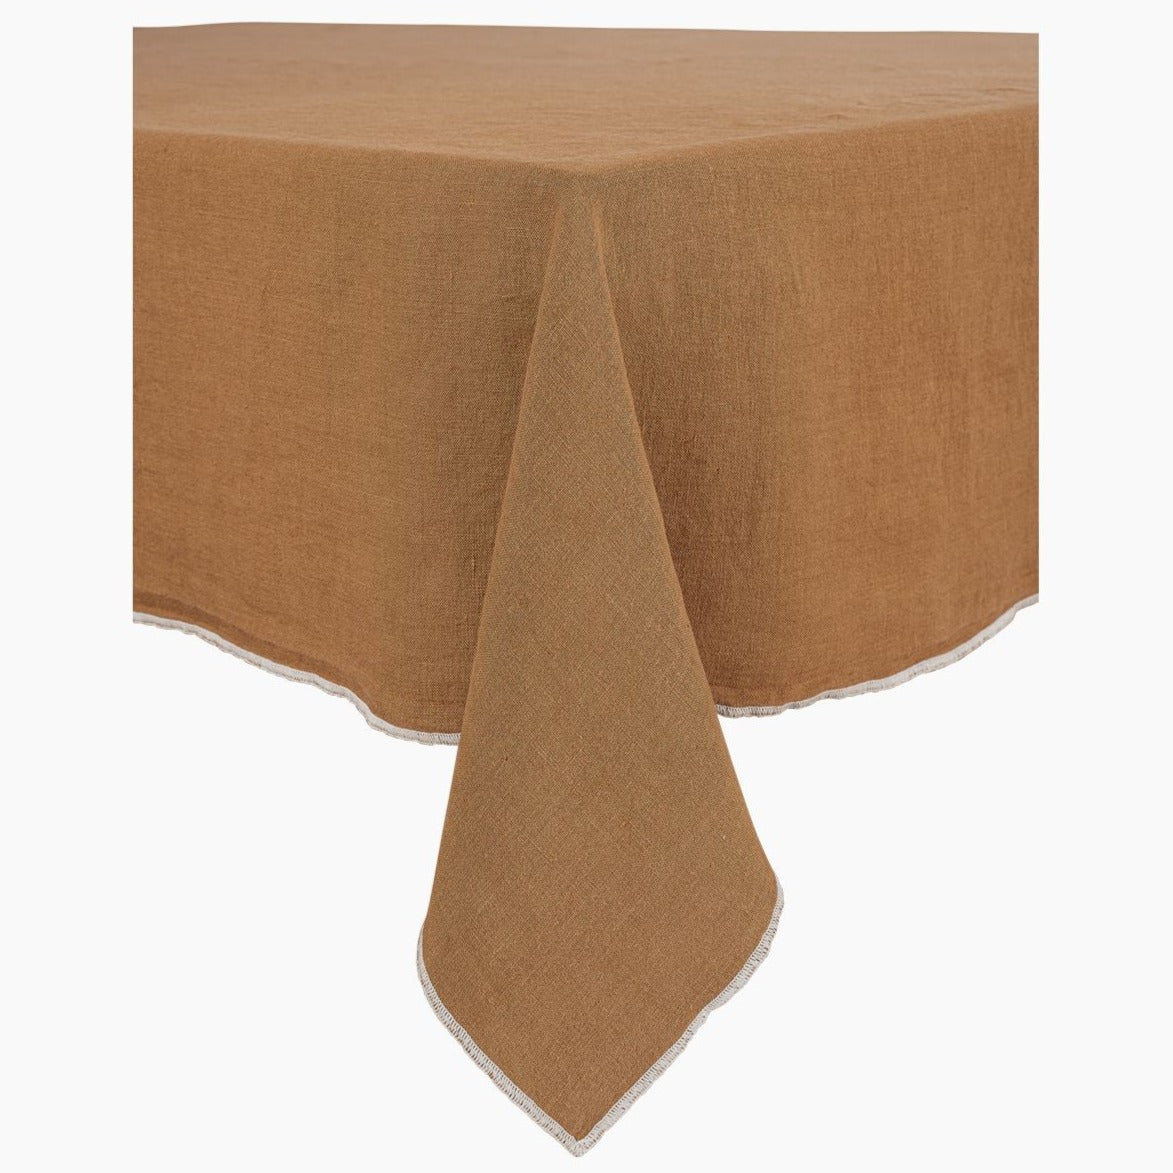 Linen Tablecloth Venise Tabacco